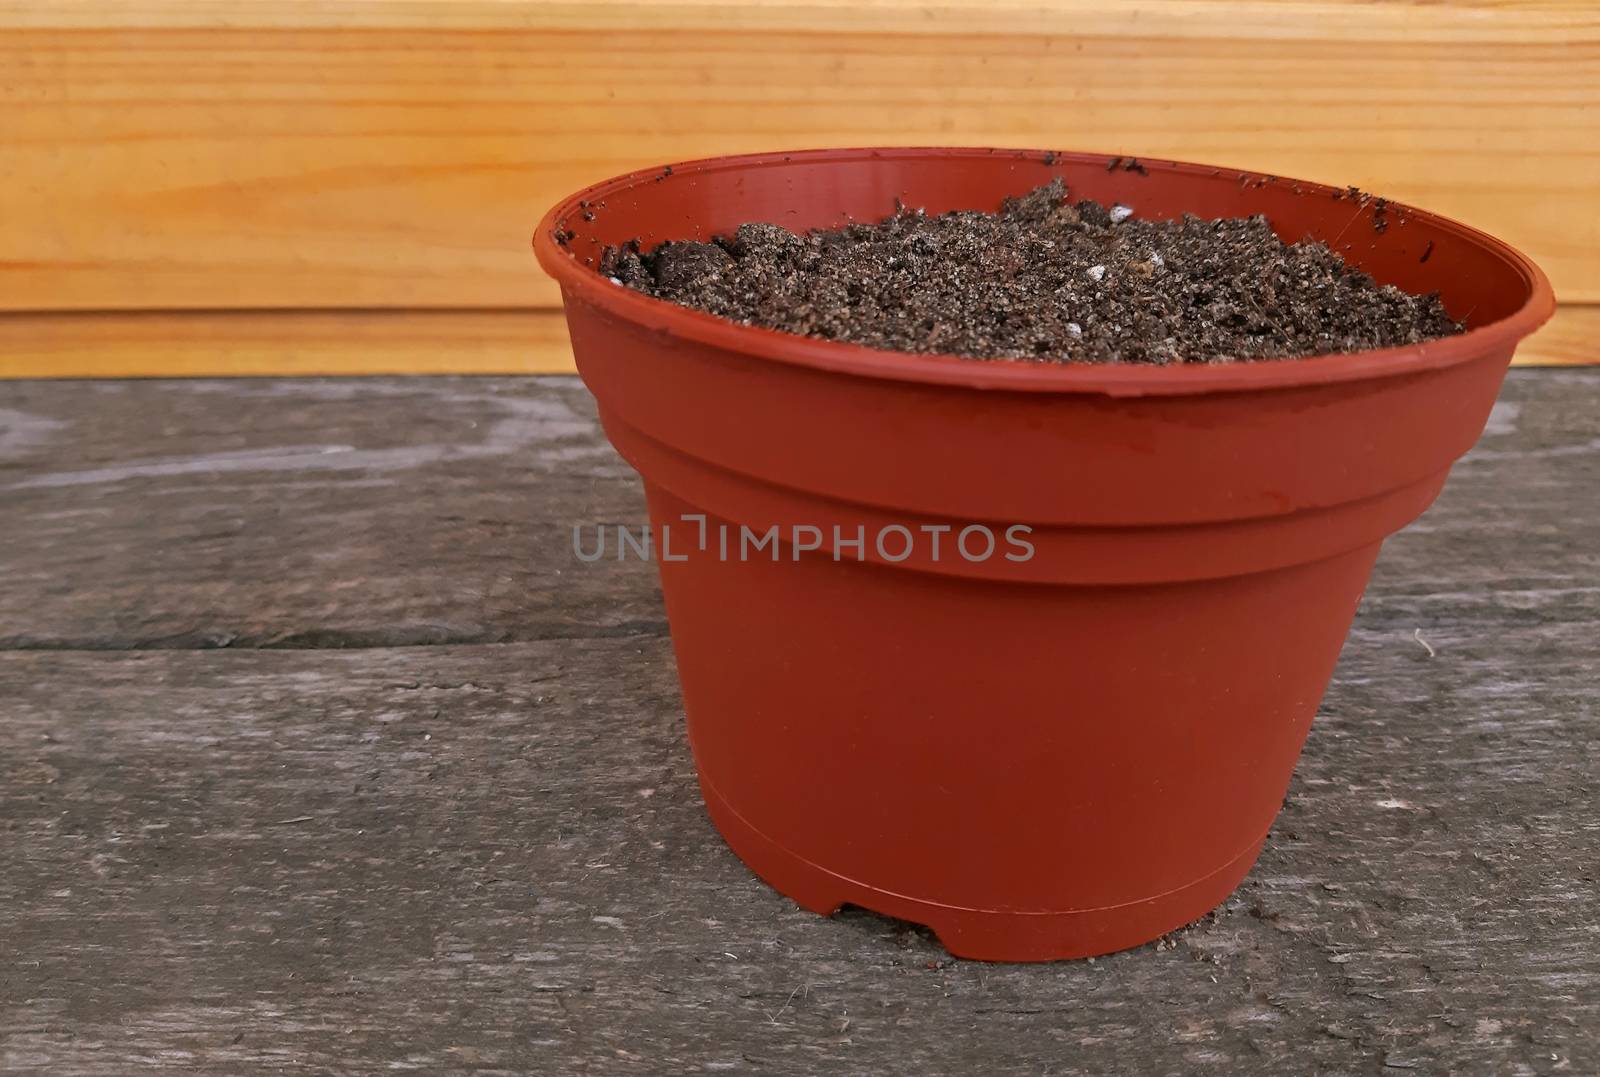 A pot full of potting soil on wooden background by Mindru